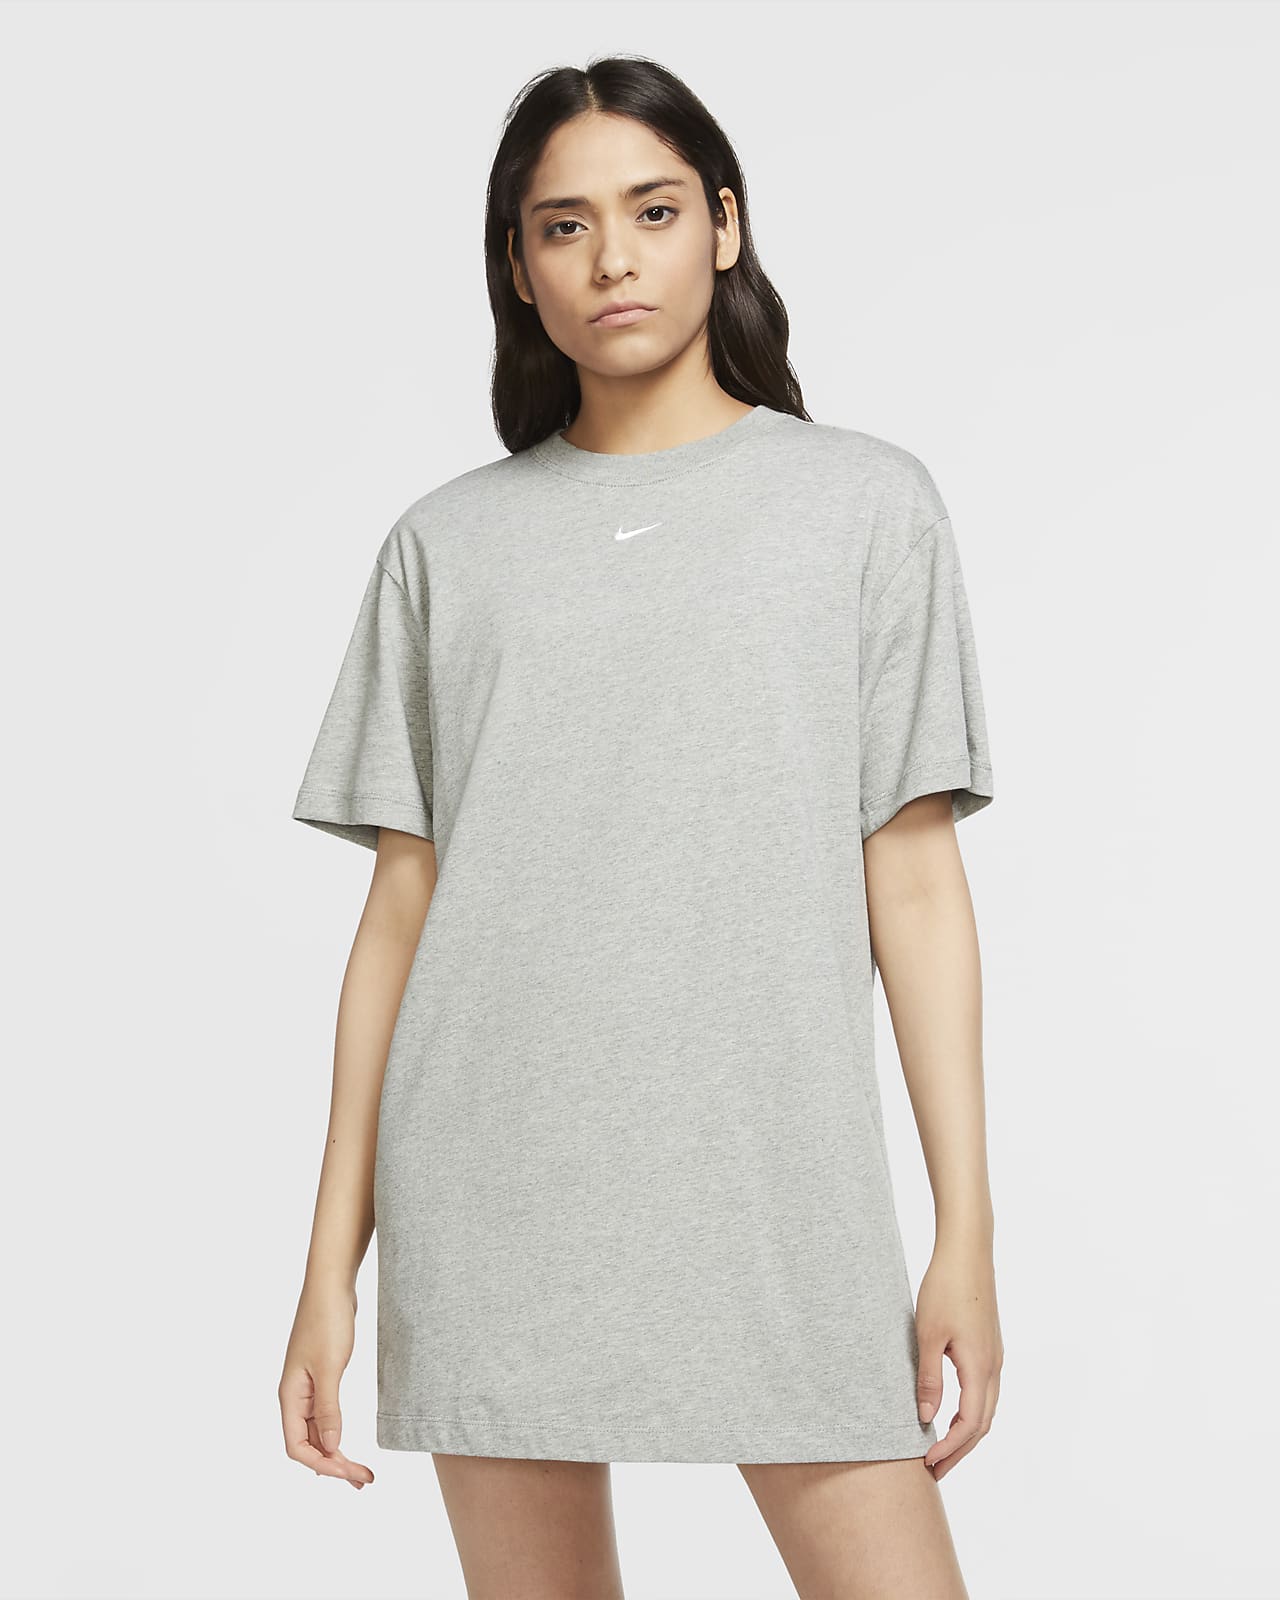 https://static.nike.com/a/images/t_PDP_1280_v1/f_auto,q_auto:eco/8c6d4153-d9b6-4b30-bde9-8f4c1bb8082e/sportswear-essential-dress-1sDJCp.png